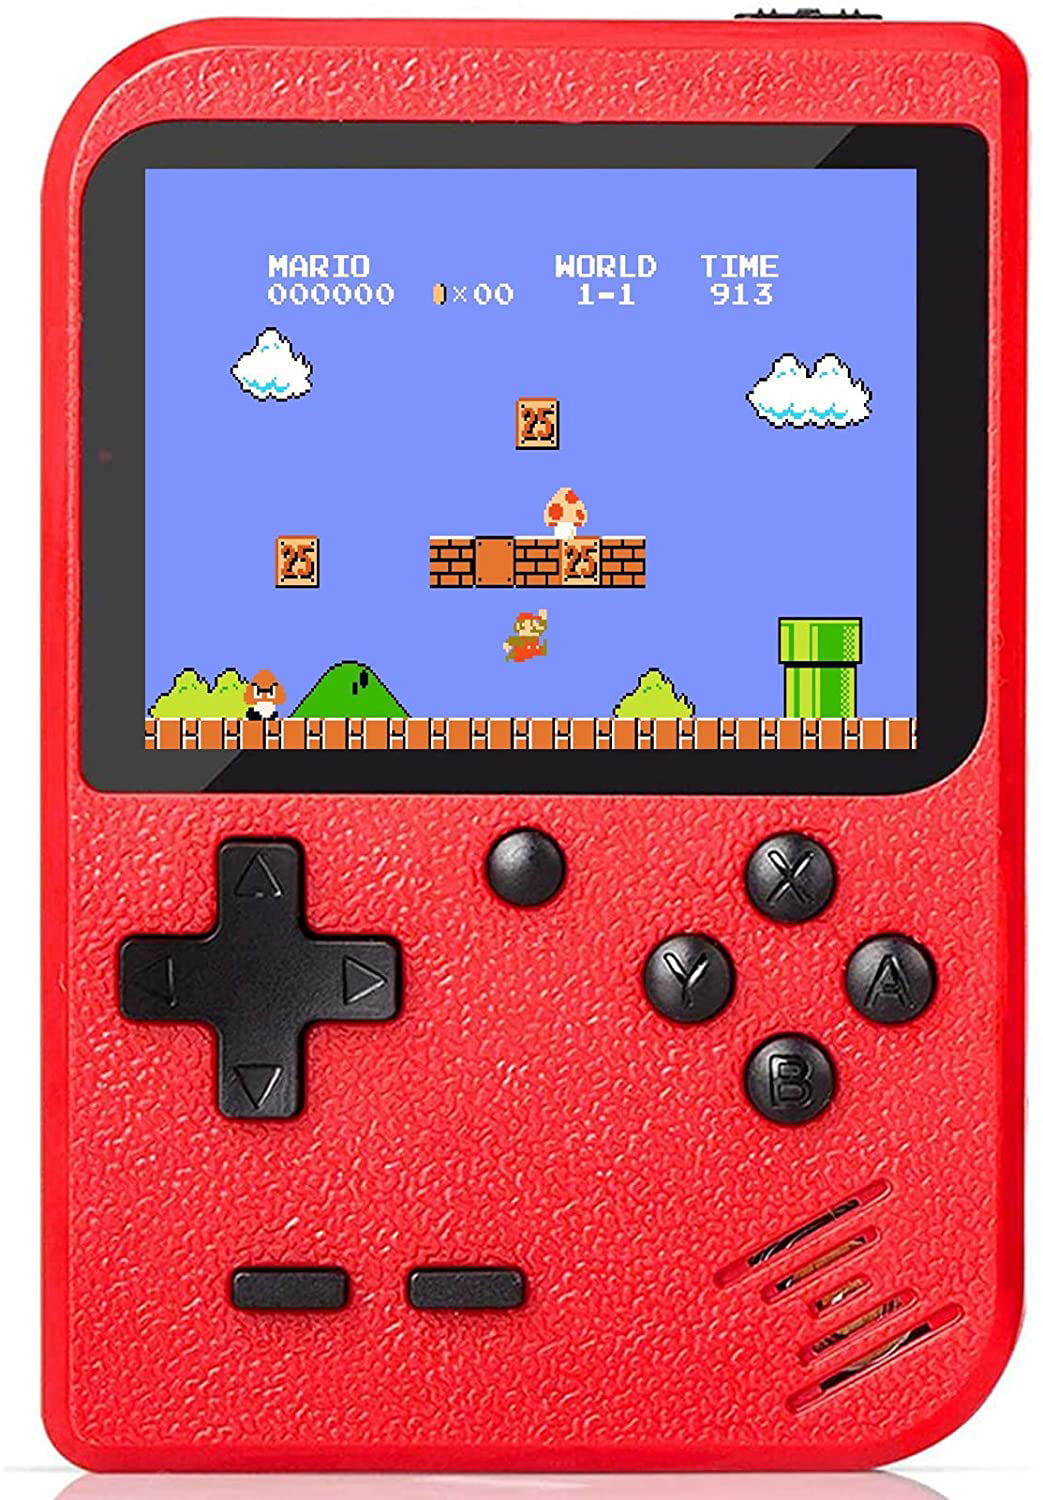 ELECTRONIC MACHINE CLASSIC GAME VIDEO KIDS RETRO GAME CONSOLE GAMEBOY HANDHELD 